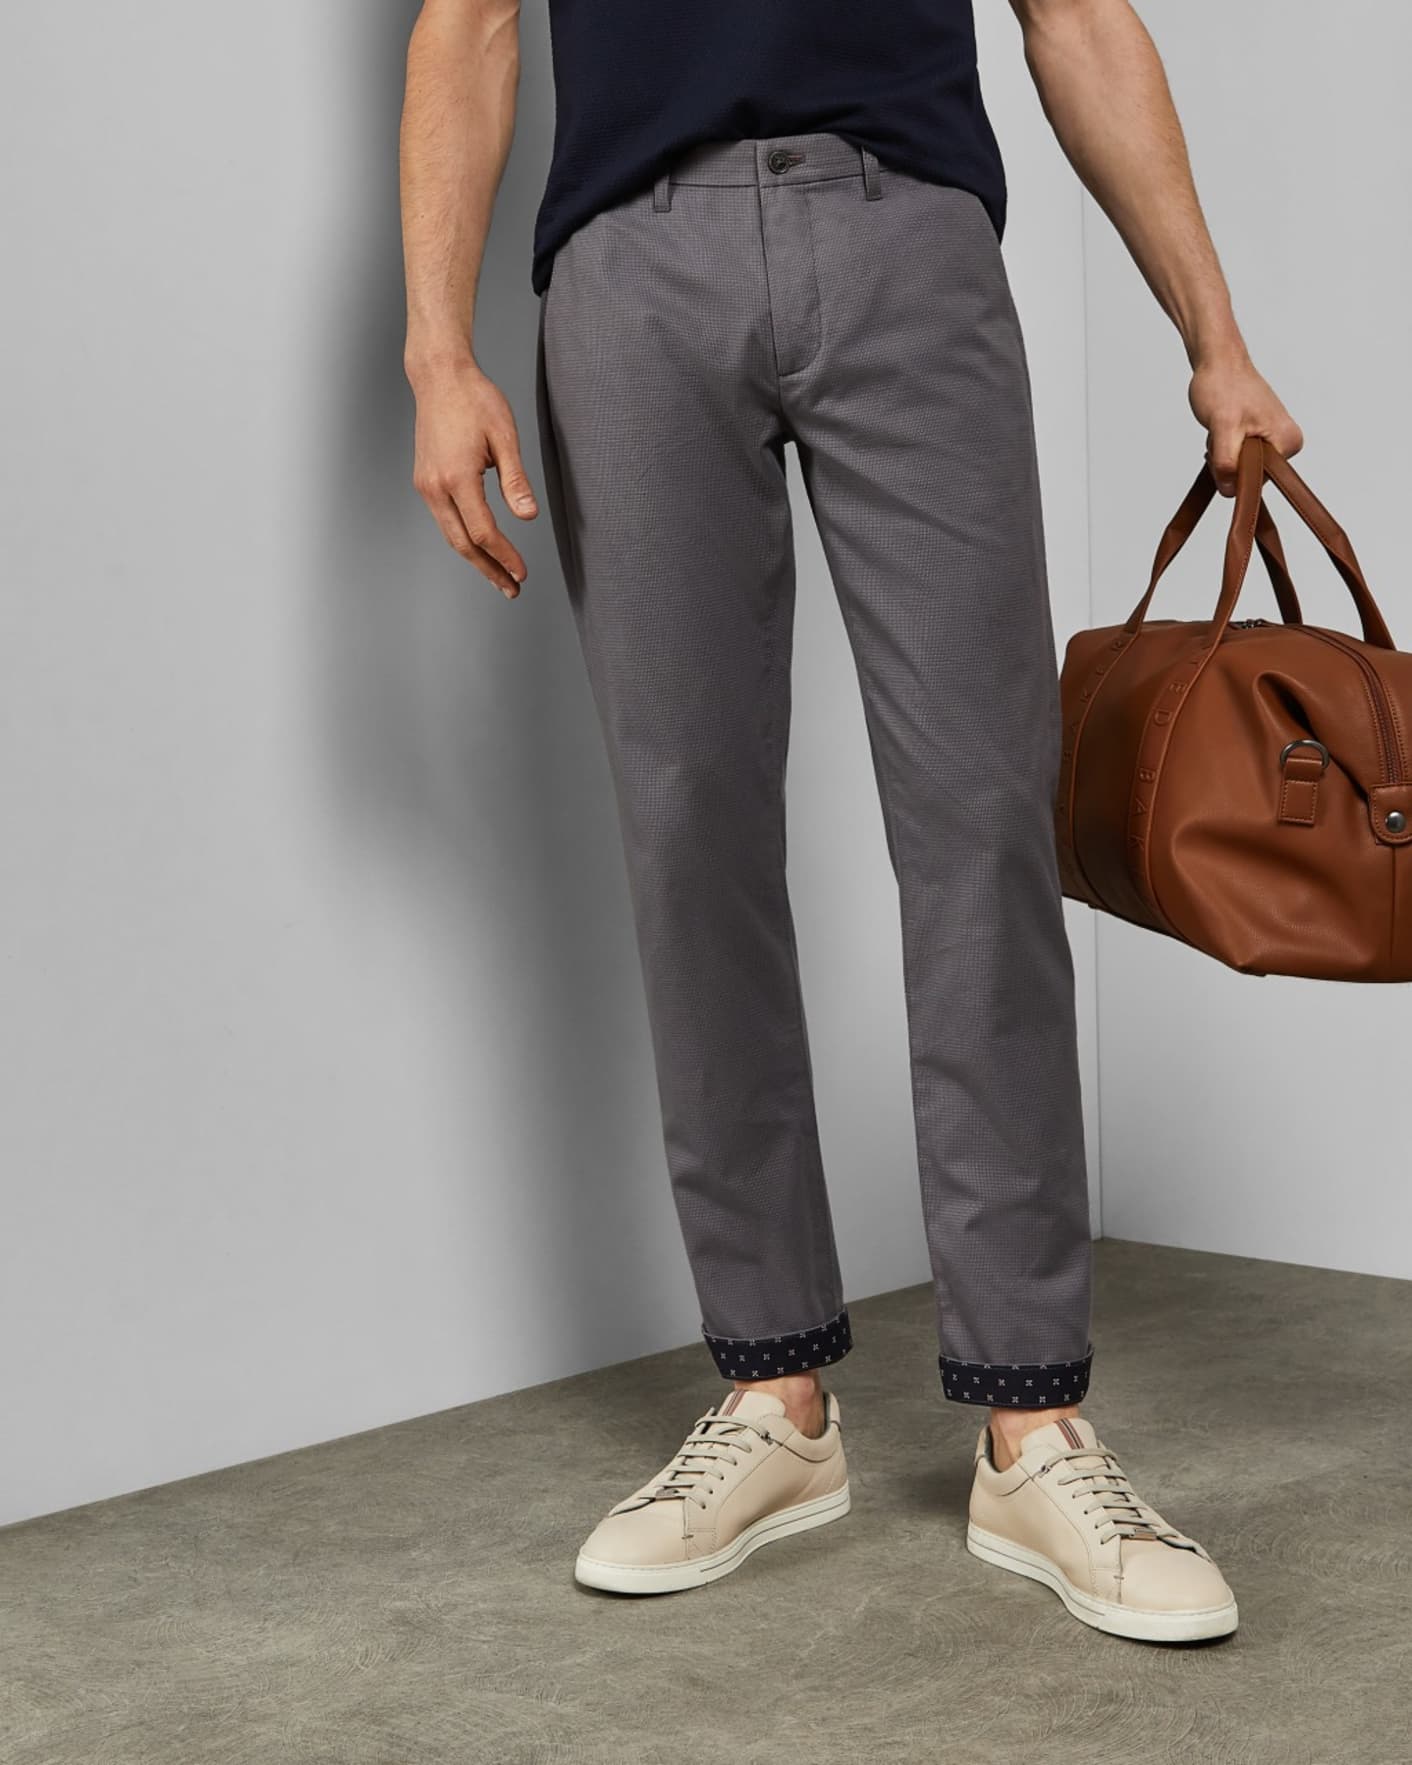 Grey Slim Fit Textured Cotton Trousers Ted Baker